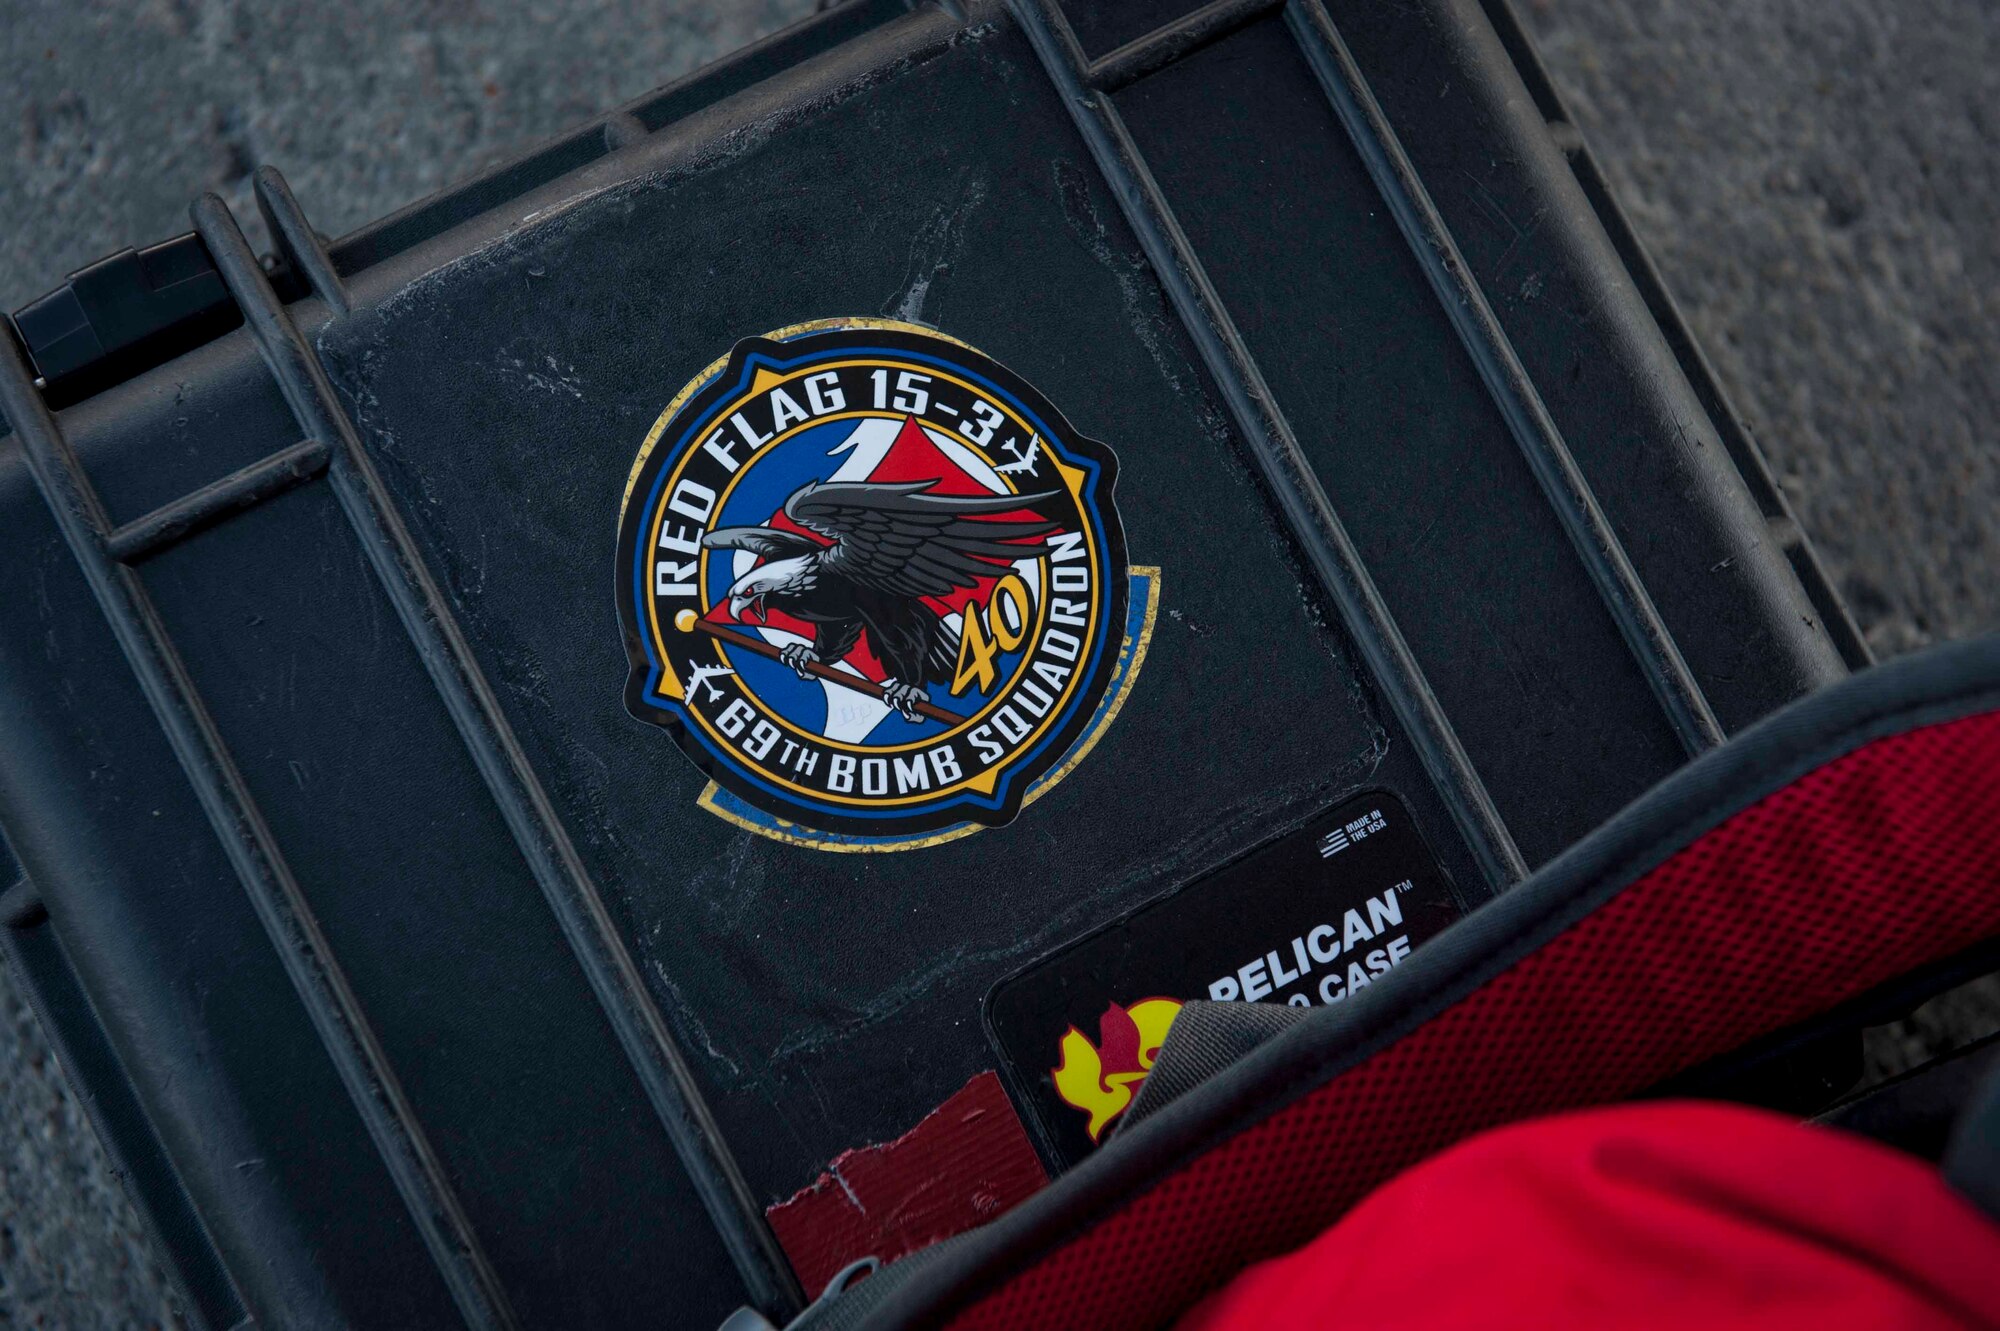 A sticker rests on a piece of luggage at Minot Air Force Base, N.D., July 31, 2015. 69th BS crews returned from a three-week-long exercise, Red Flag 15-3, which took place at Nellis AFB, Nev. (U.S. Air Force photo/Airman 1st Class Sahara L. Fales)